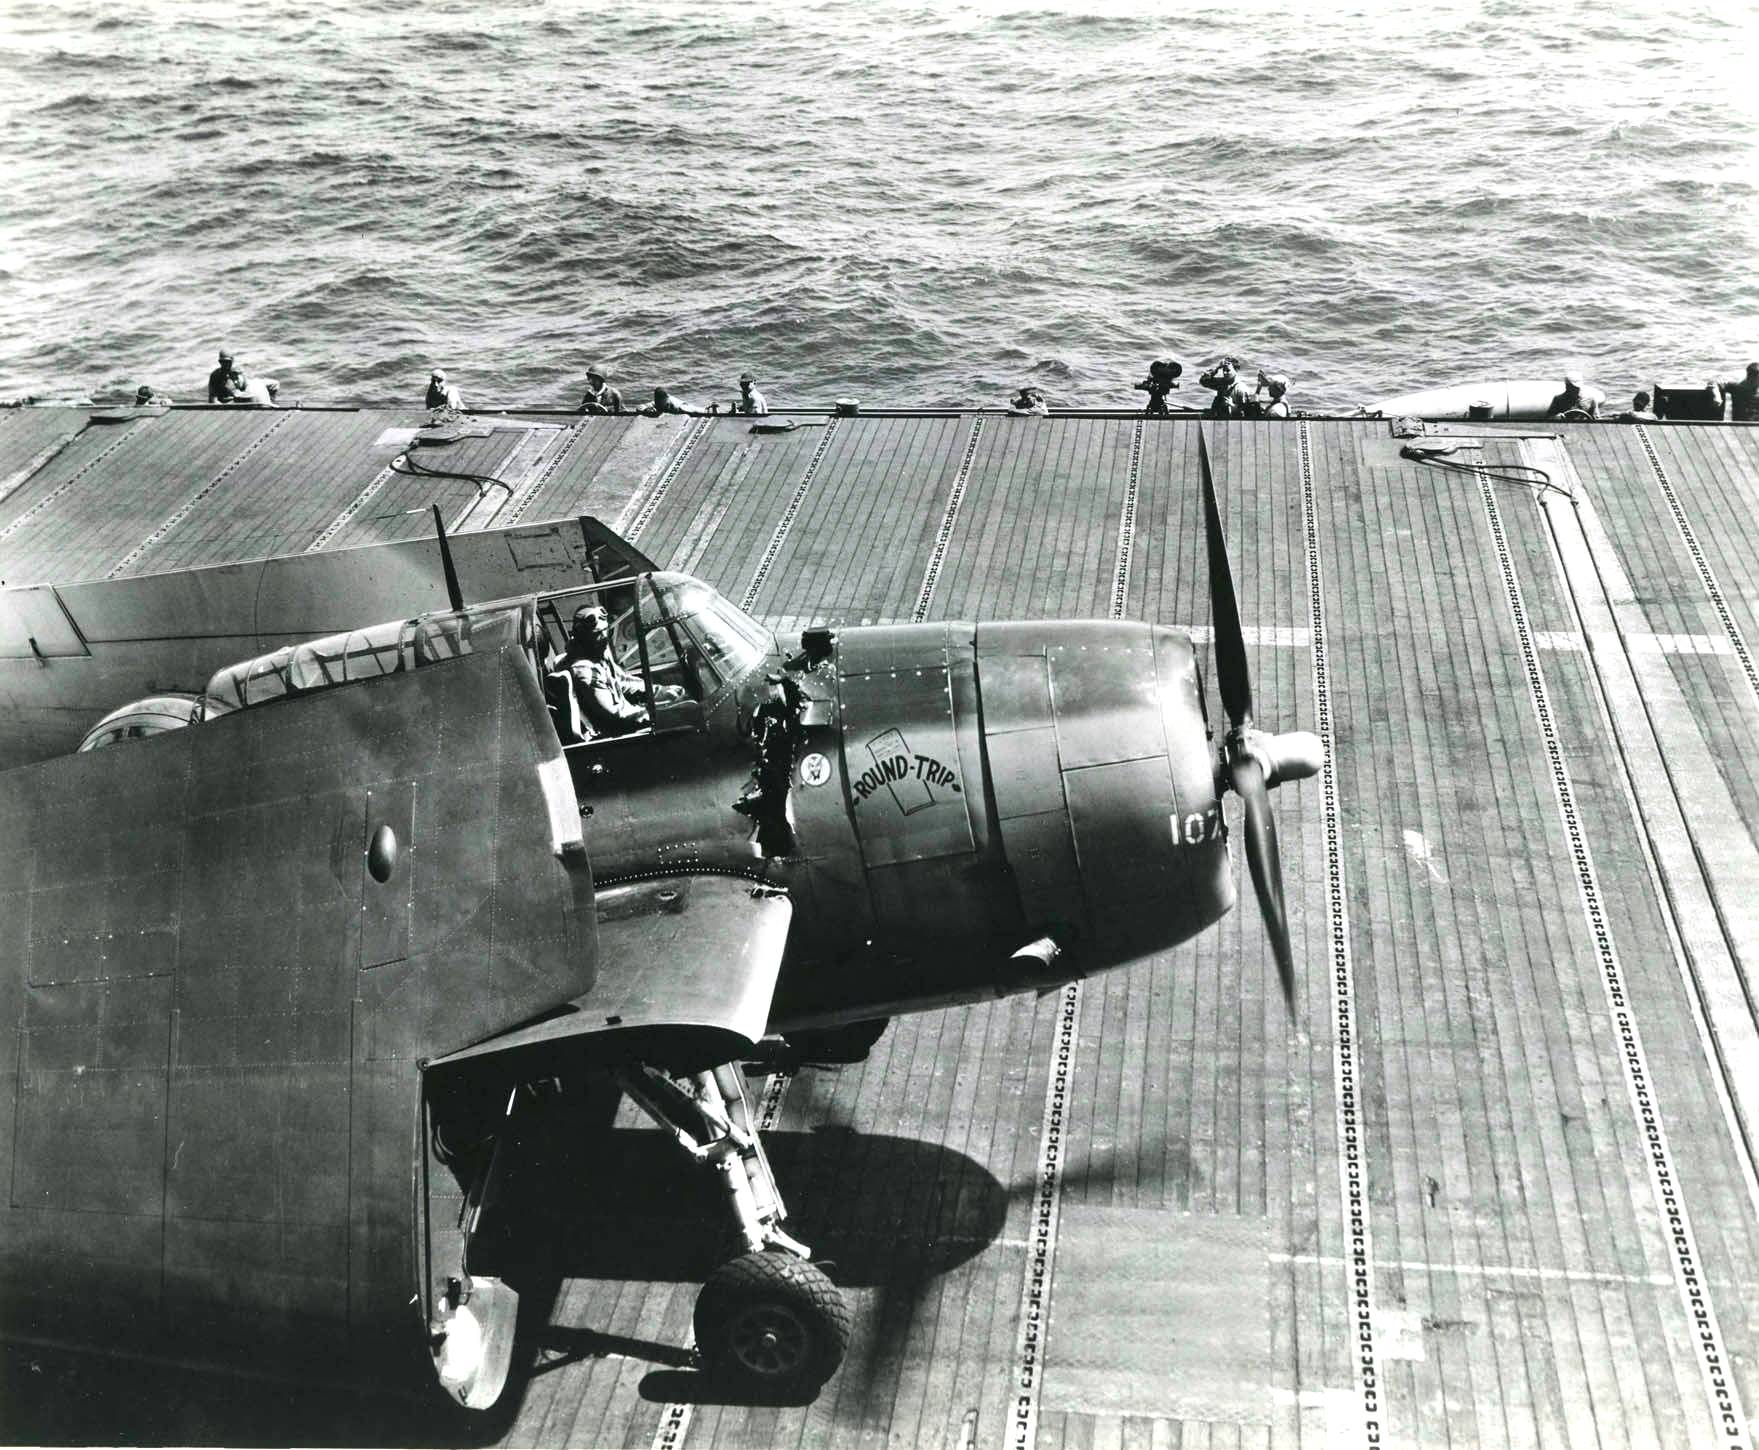 US Navy pilot Ensign C. V. 'Vern' Higman landing on Ticonderoga after a raid on Ormoc Bay, Philippine Islands, 11 Nov 1944; note AA damage on TBM-3 Avenger aircraft 'Round Trip Ticket'